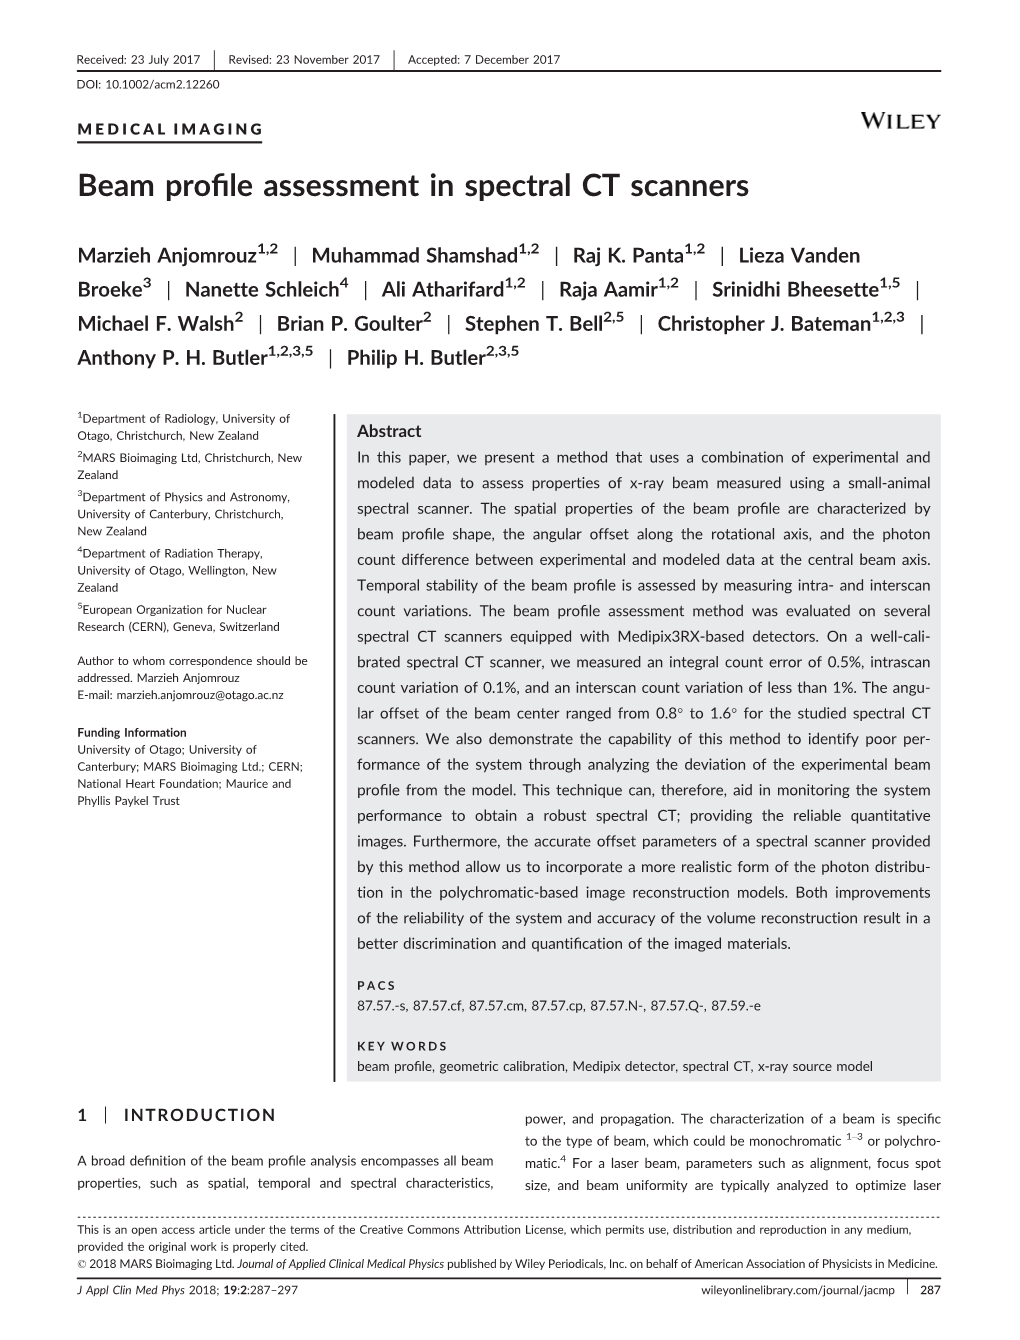 Beam Profile Assessment in Spectral CT Scanners